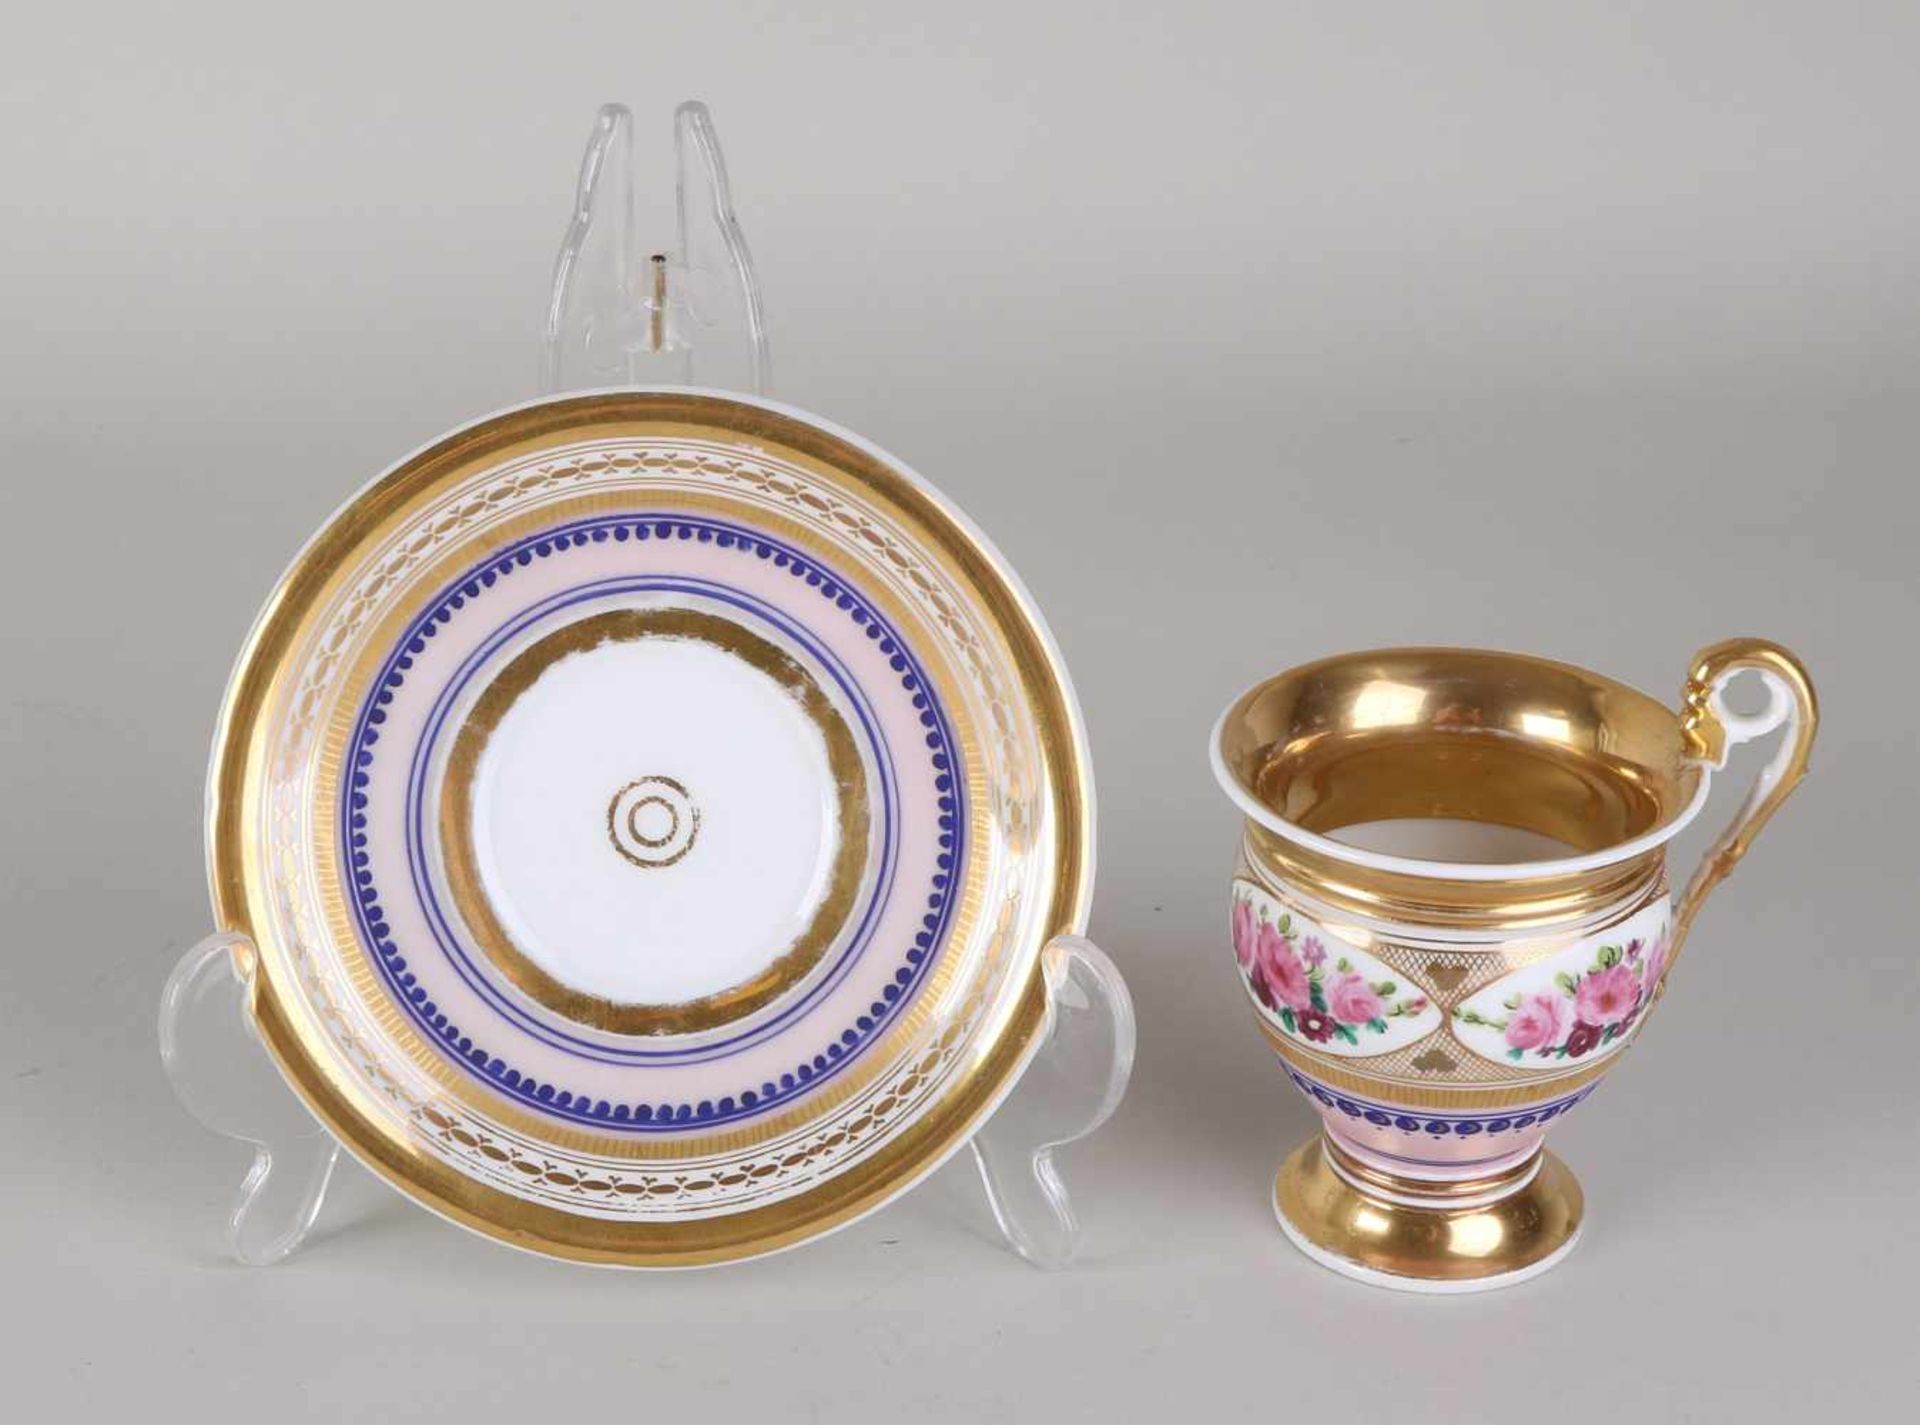 19th century gilt Biedermeier cup and saucer with floral decors. Handpainted. Size: 10 x 13 cm ø. In